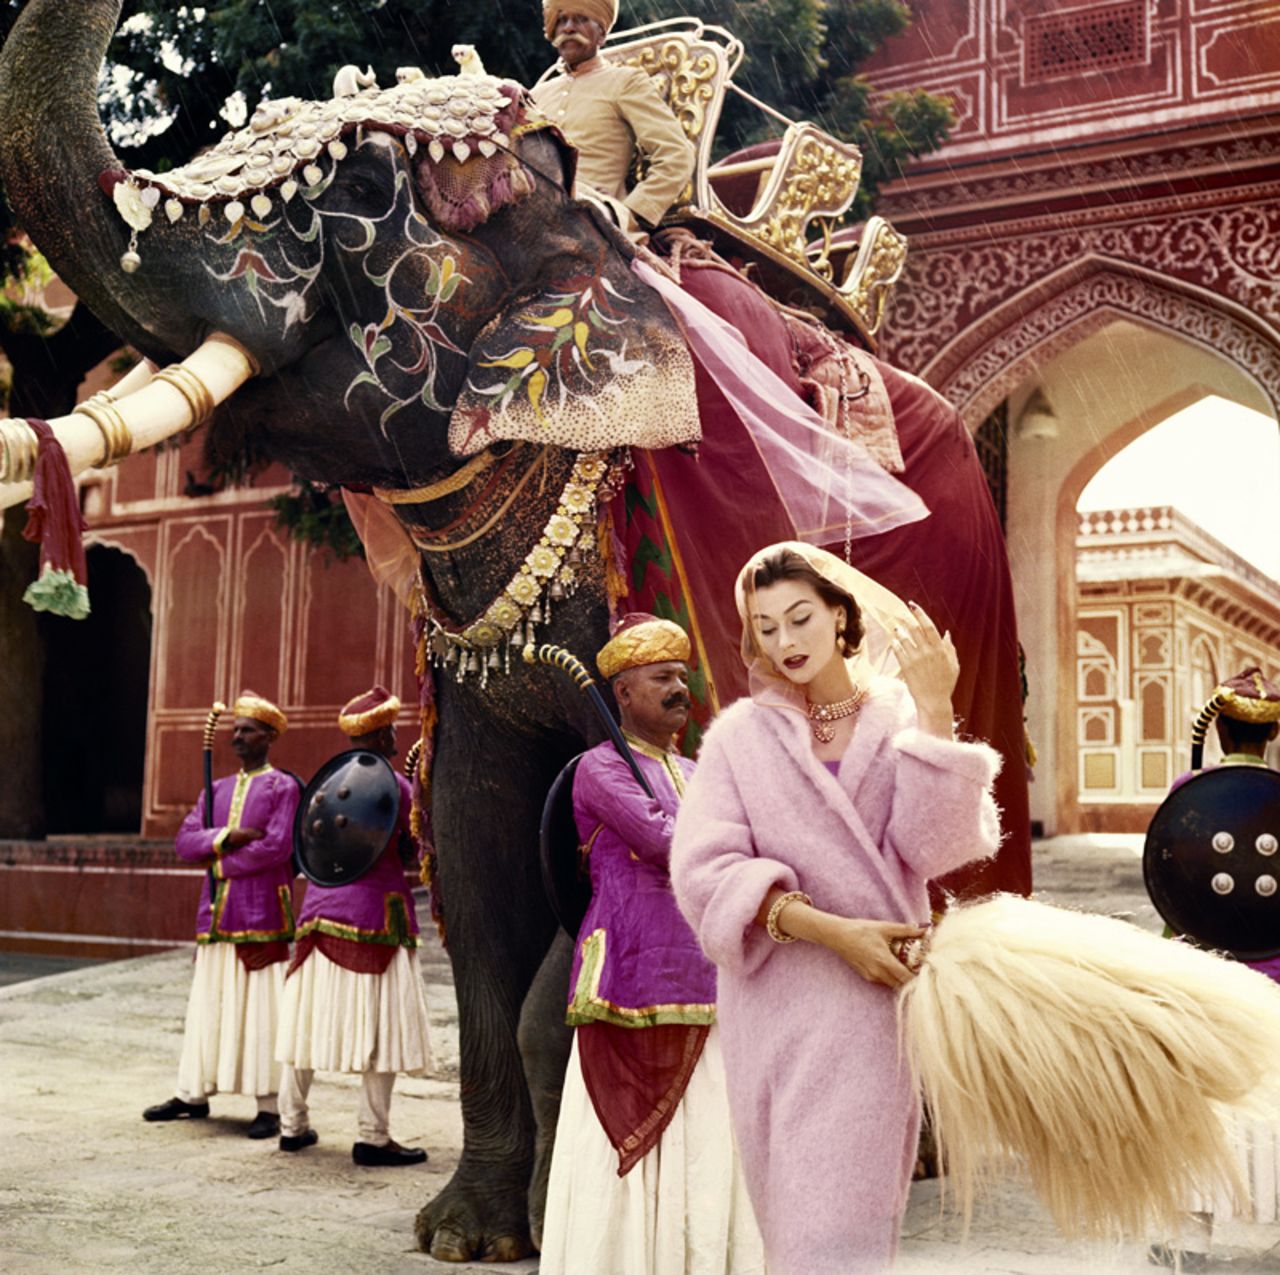 Anne Gunning in Jaipur by Norman Parkinson, 1956. Vogue 100: A Century of Style is at the National Portrait Gallery, London, from 11 February-22 May 2016, sponsored by Leon Max.